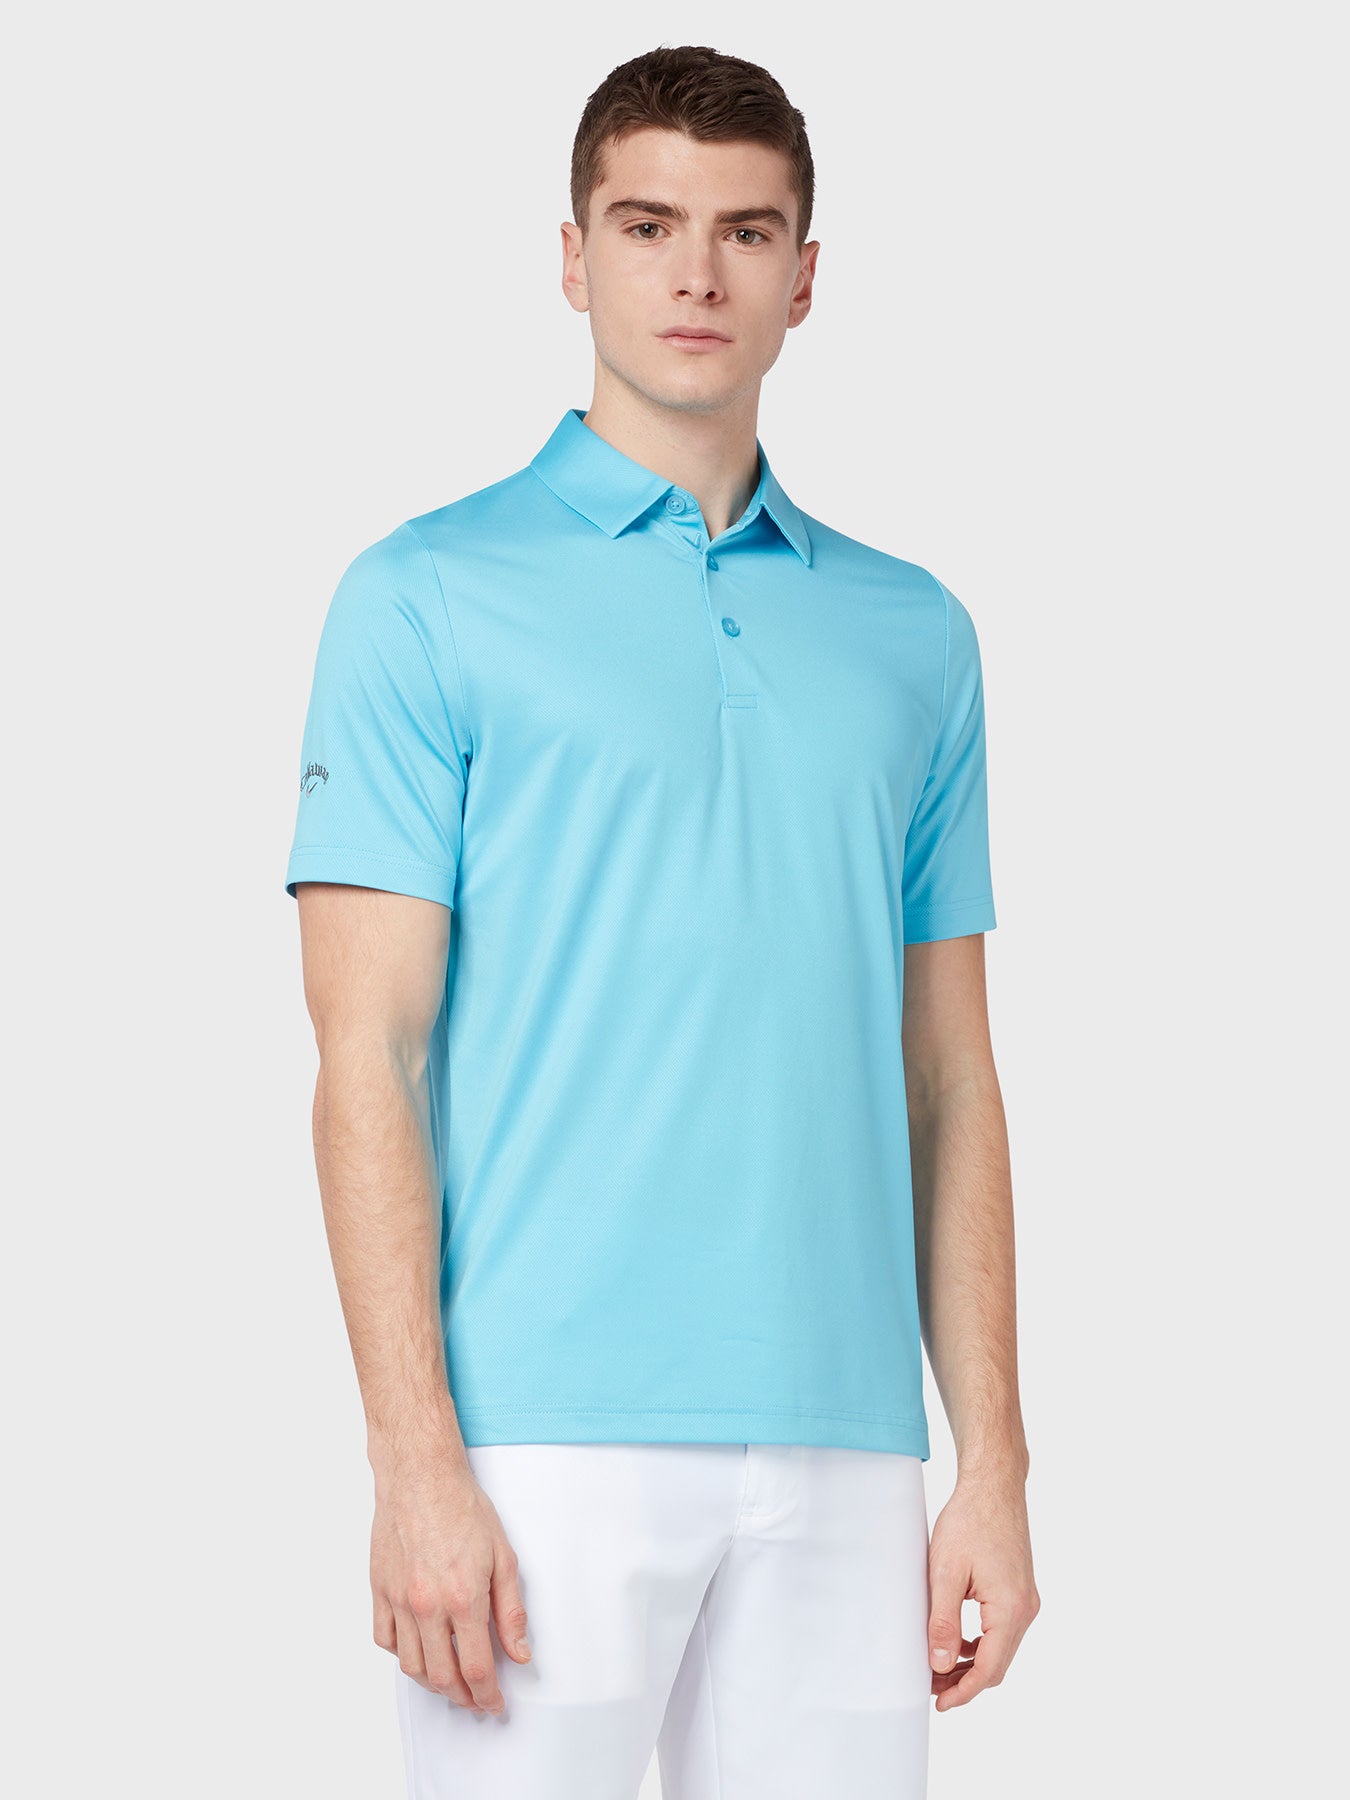 View Swing Tech Tour Polo In Blue Grotto Blue Grotto XL information